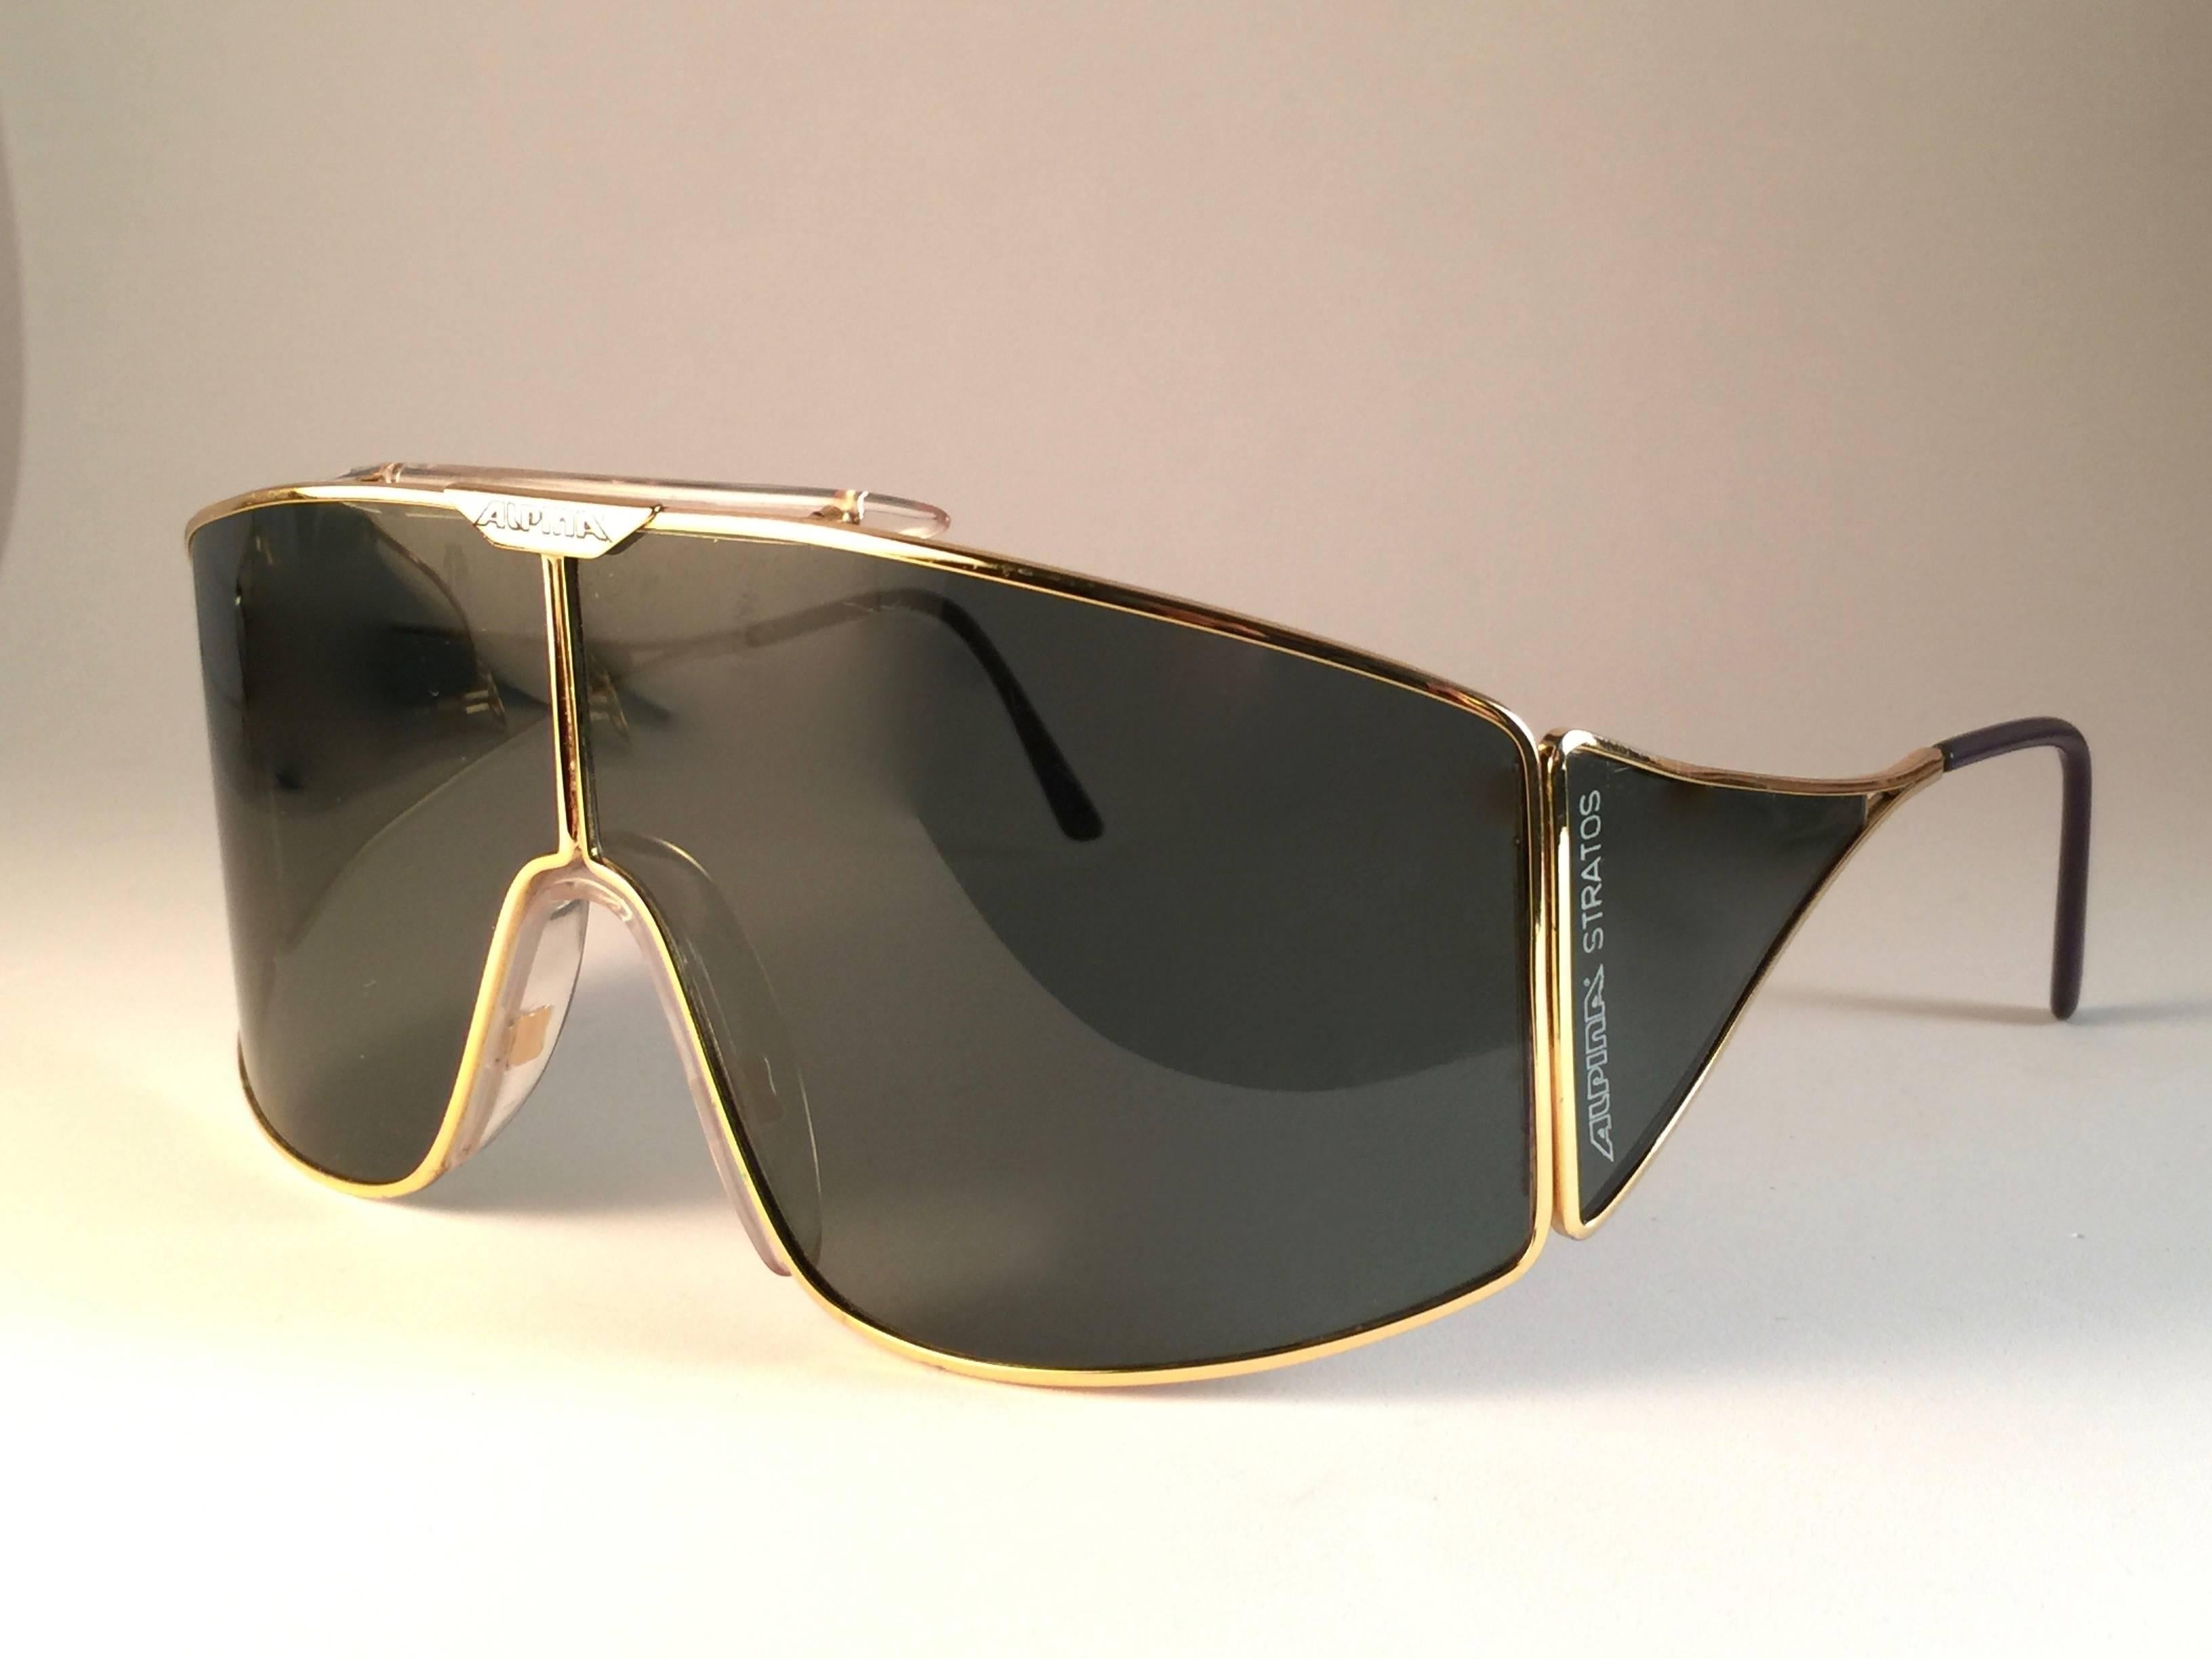 New Vintage Alpina Stratos Sunglasses. Gold frame with green mono lens and side cups. 

Comes with its original Alpina case. This pair may show minor sign of wear due to storage.

Made in West Germany.